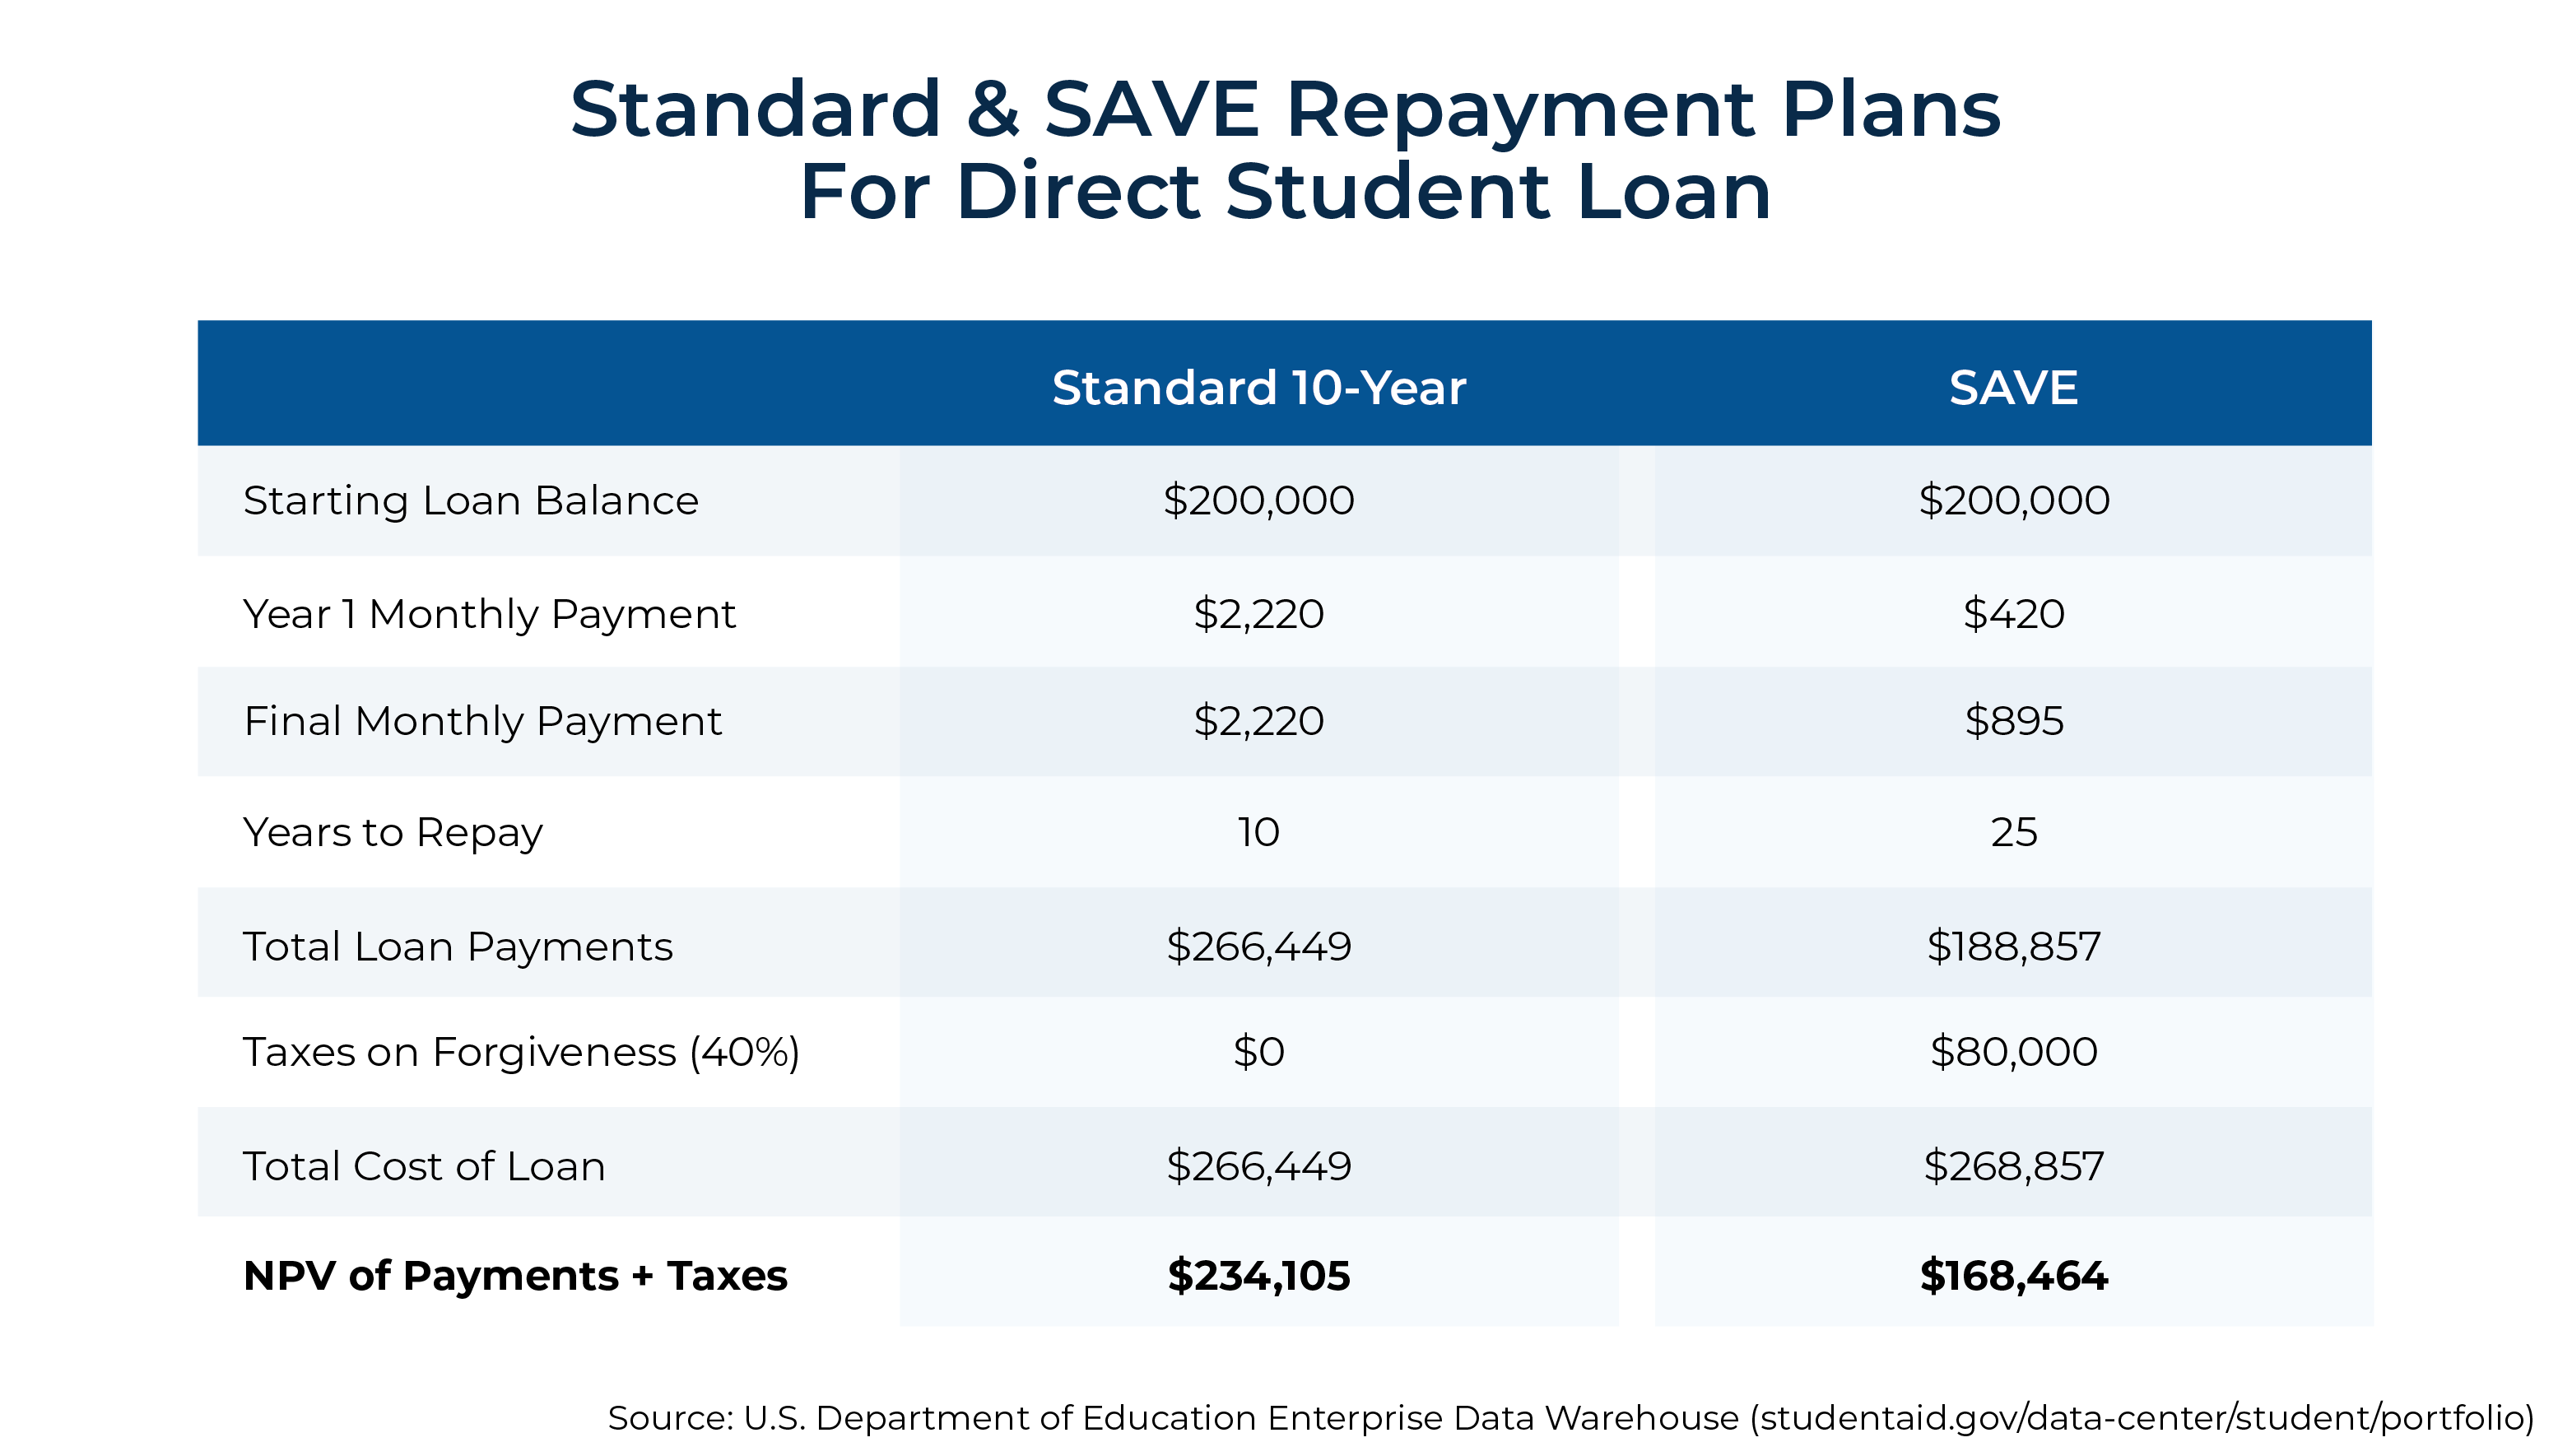 Standard SAVE Repayment Plans for Direct Student Loan